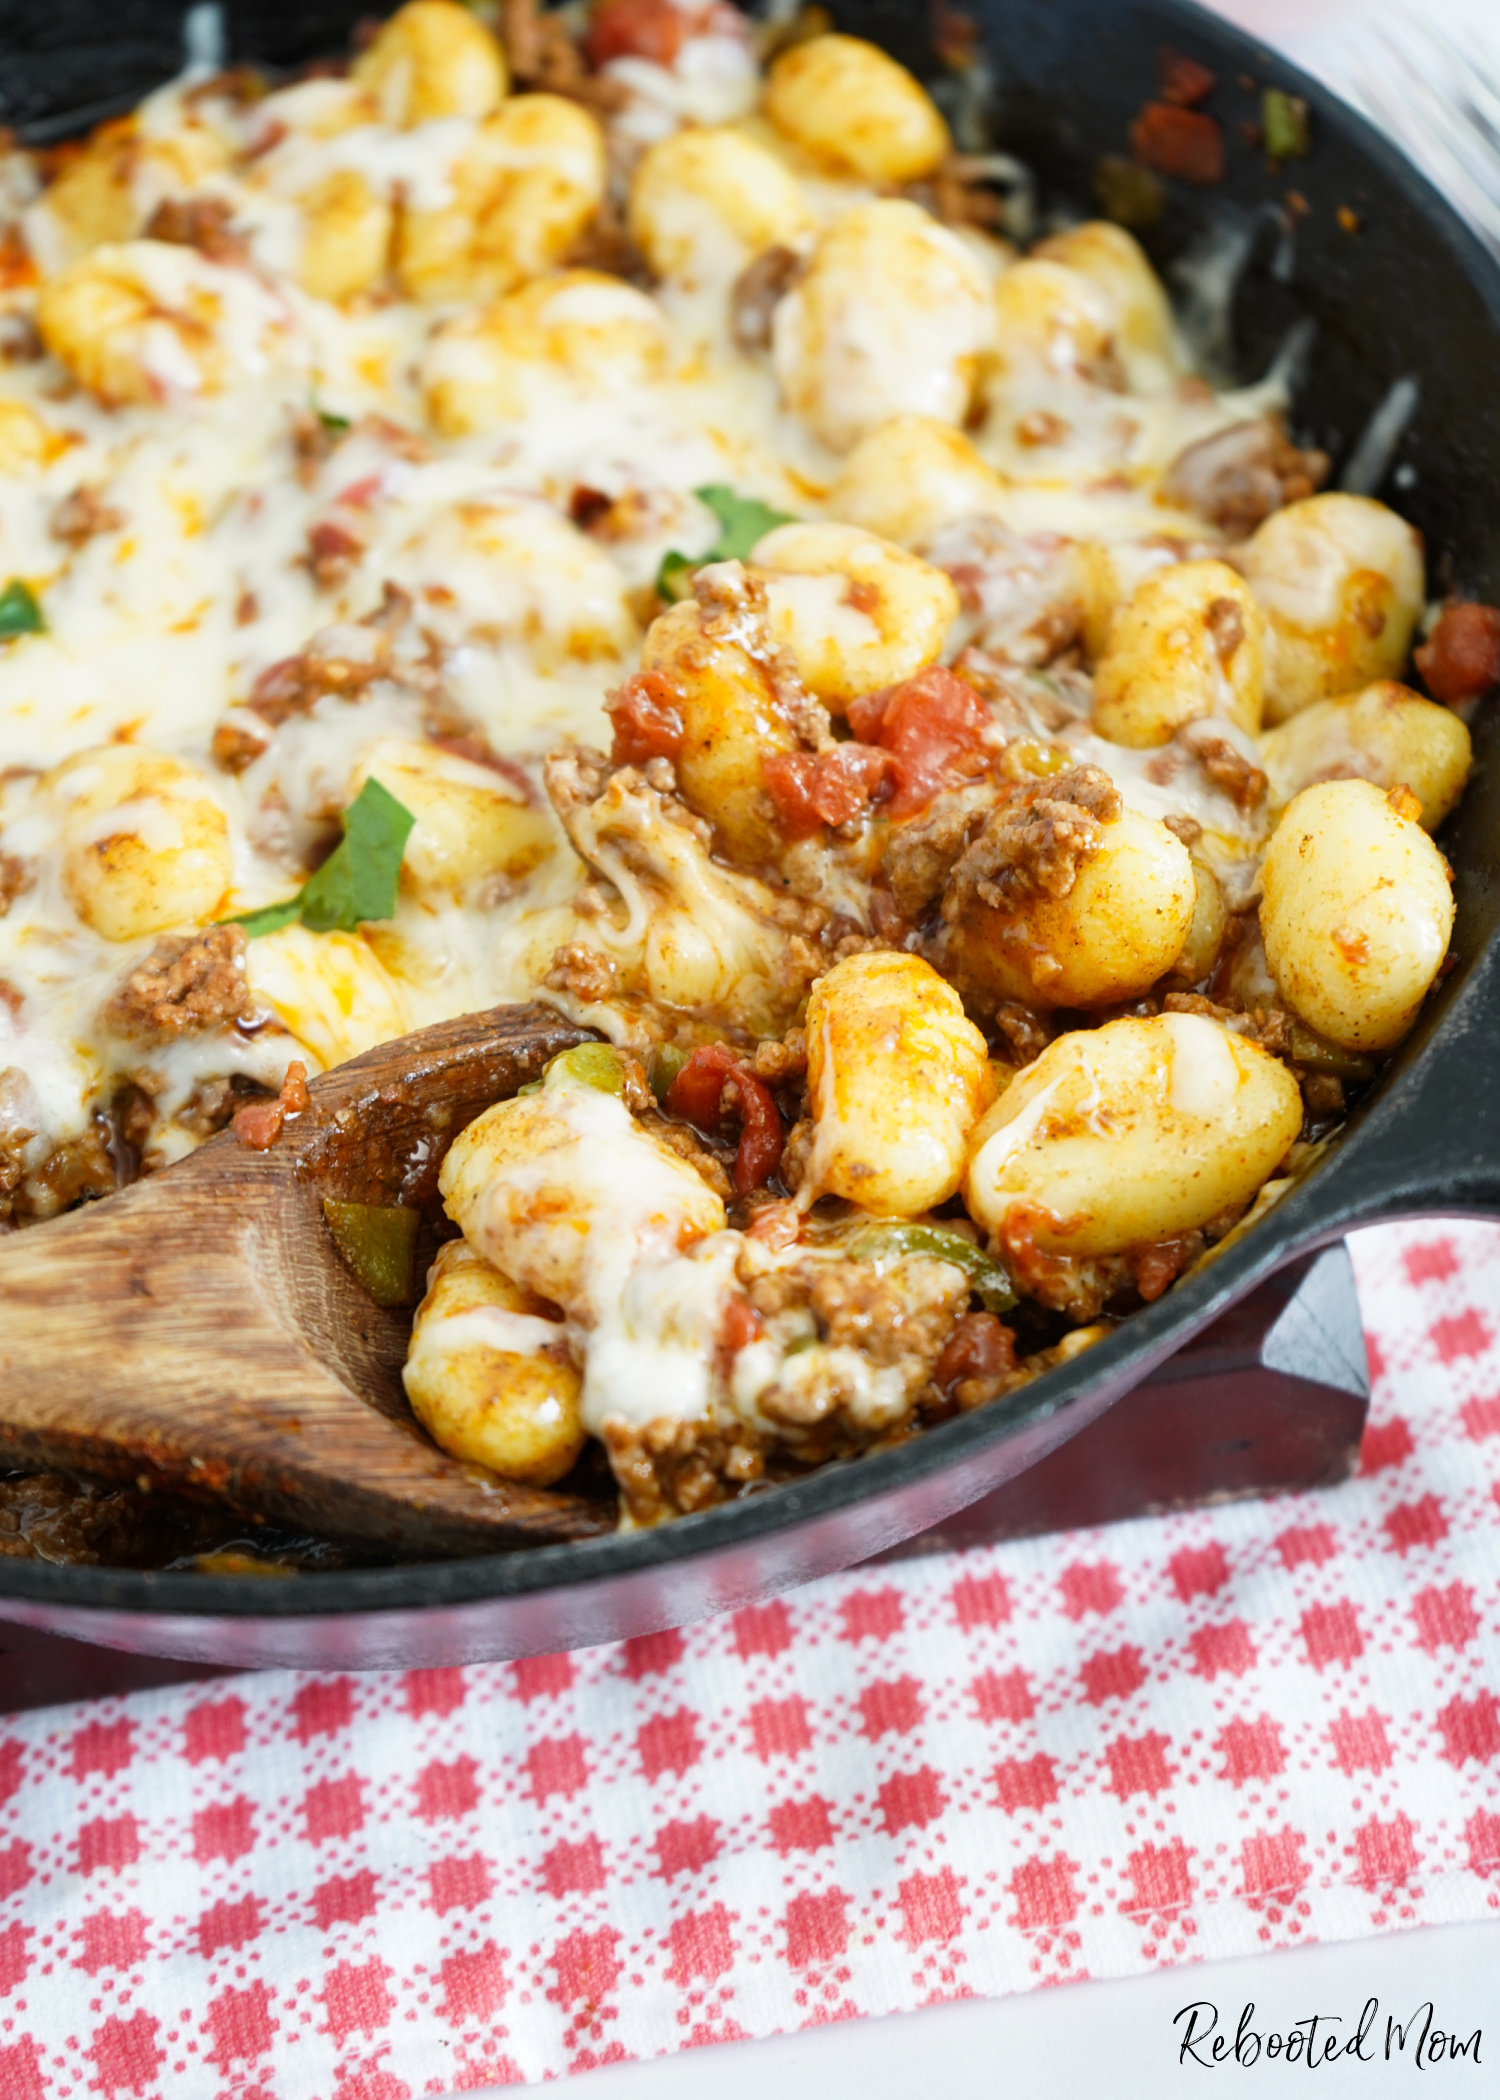 Taco Gnocchi takes regular gnocchi and elevates it up a level to an easy, delicious, kid-friendly dinner ready in 20 minutes with just 5 ingredients!